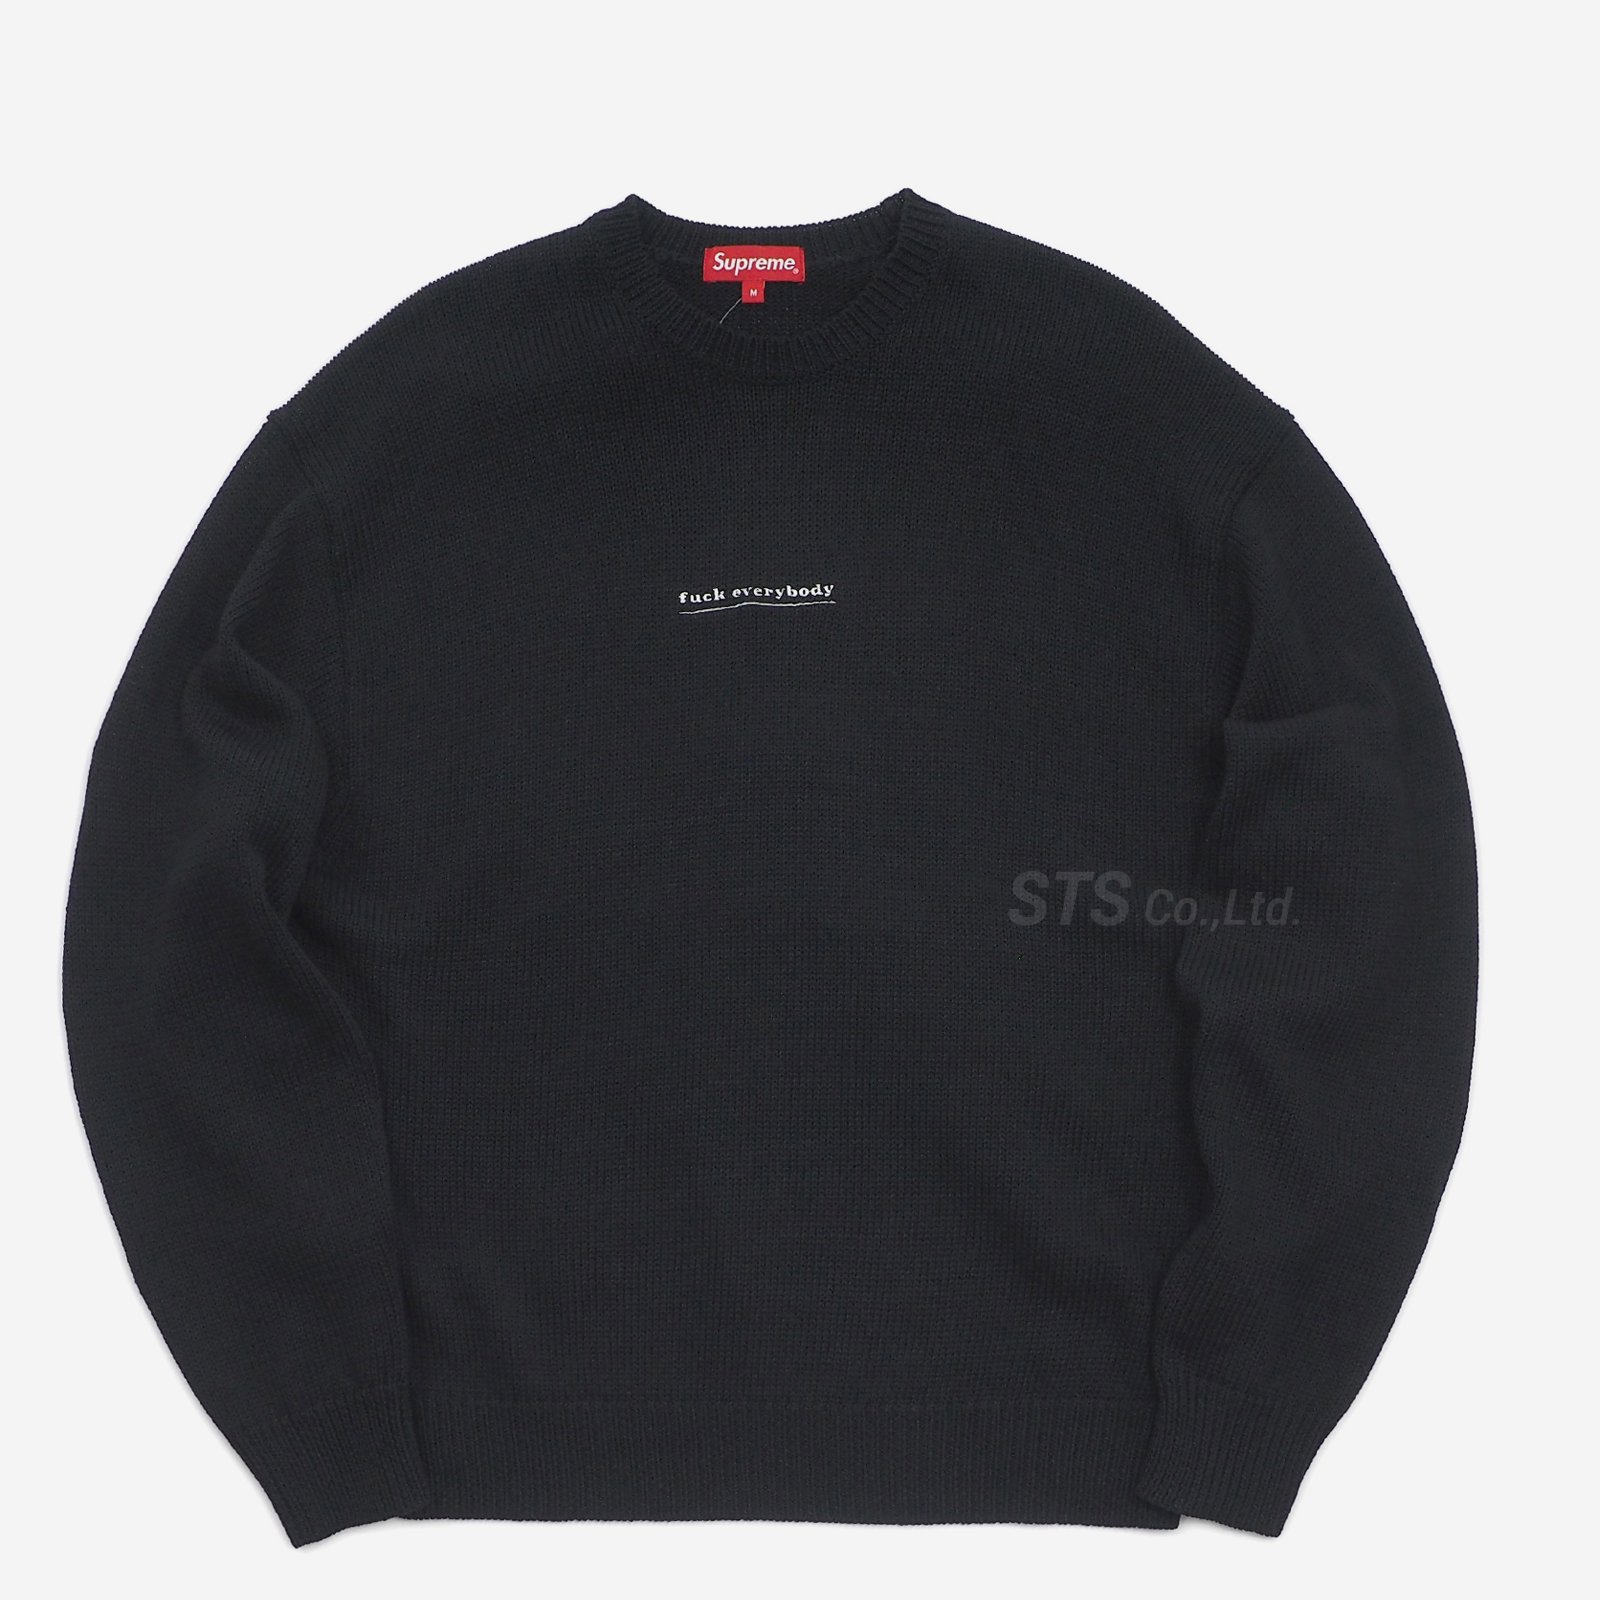 Supreme - Fuck Everybody Sweater - ParkSIDER